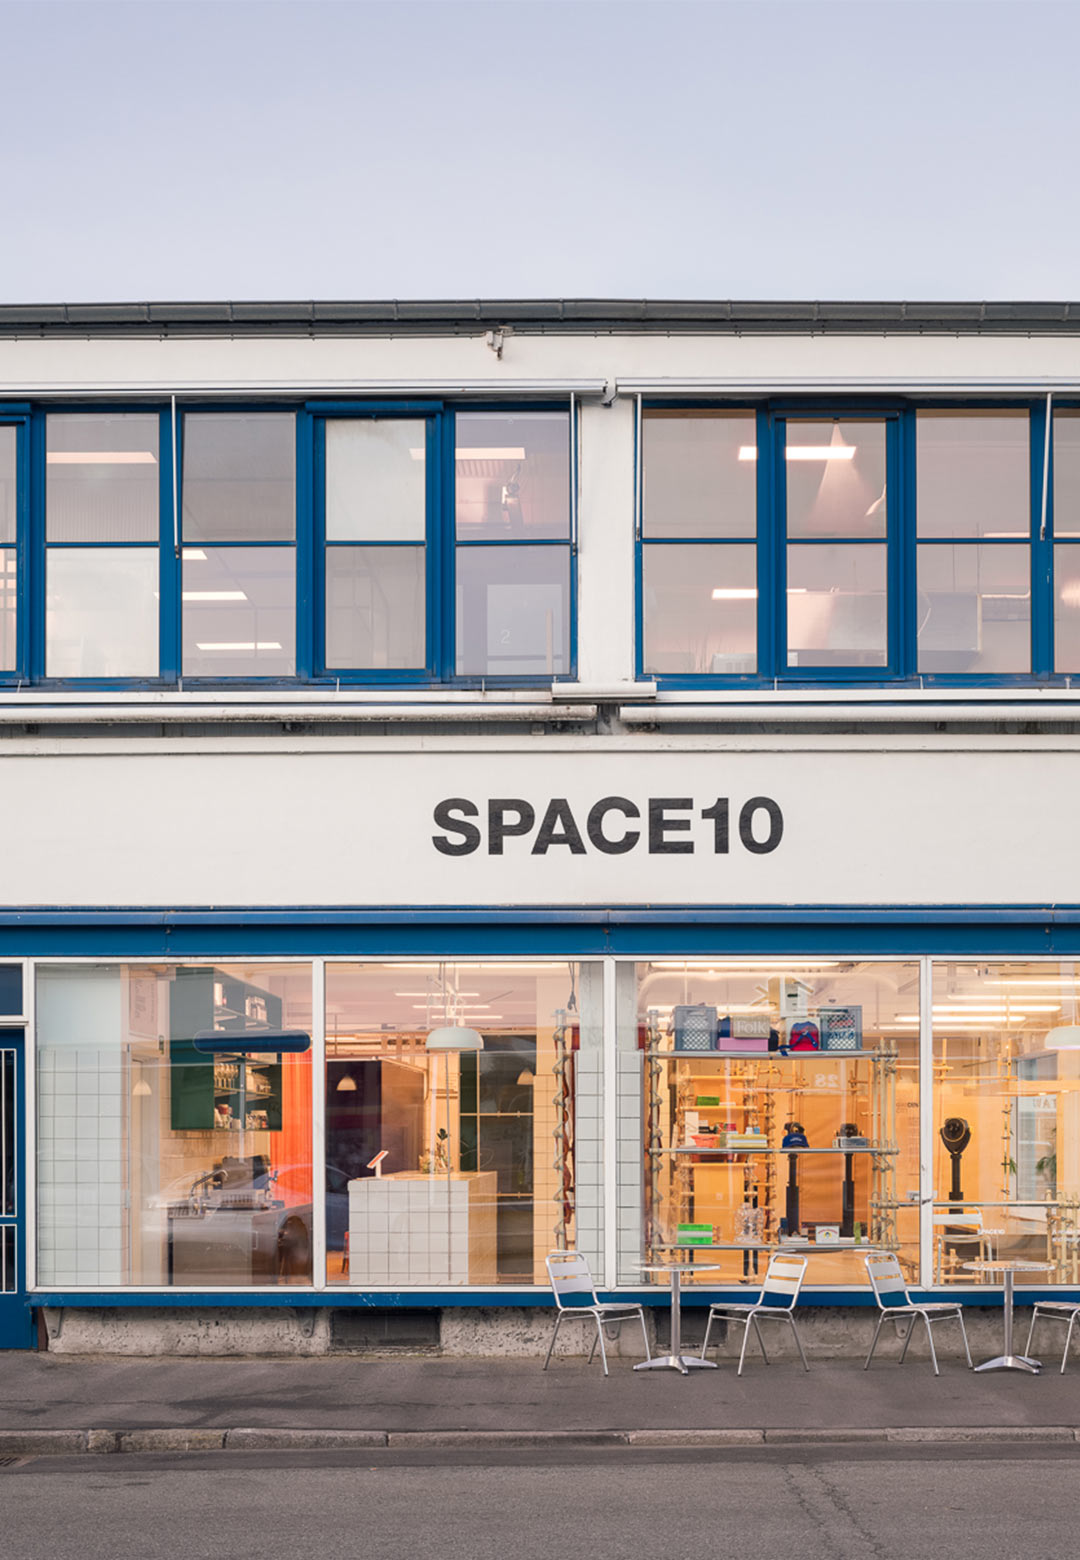 Goodbye SPACE10: the research and design lab for IKEA is set to close after a decade